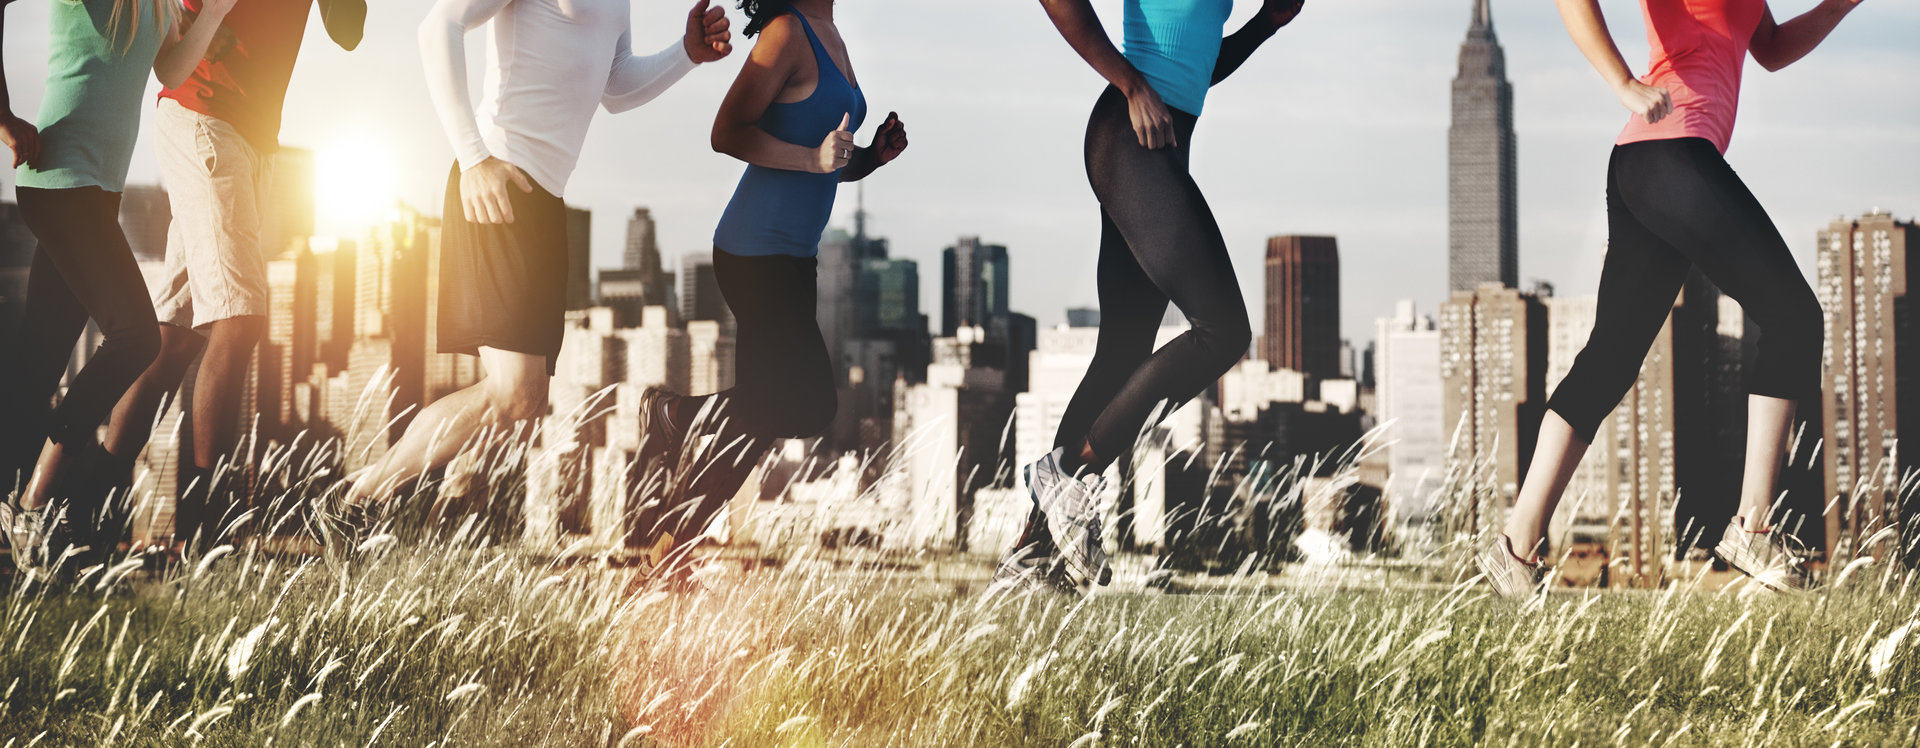 Line of people in workout clothes running in a grassy field with a city skyline behind them.